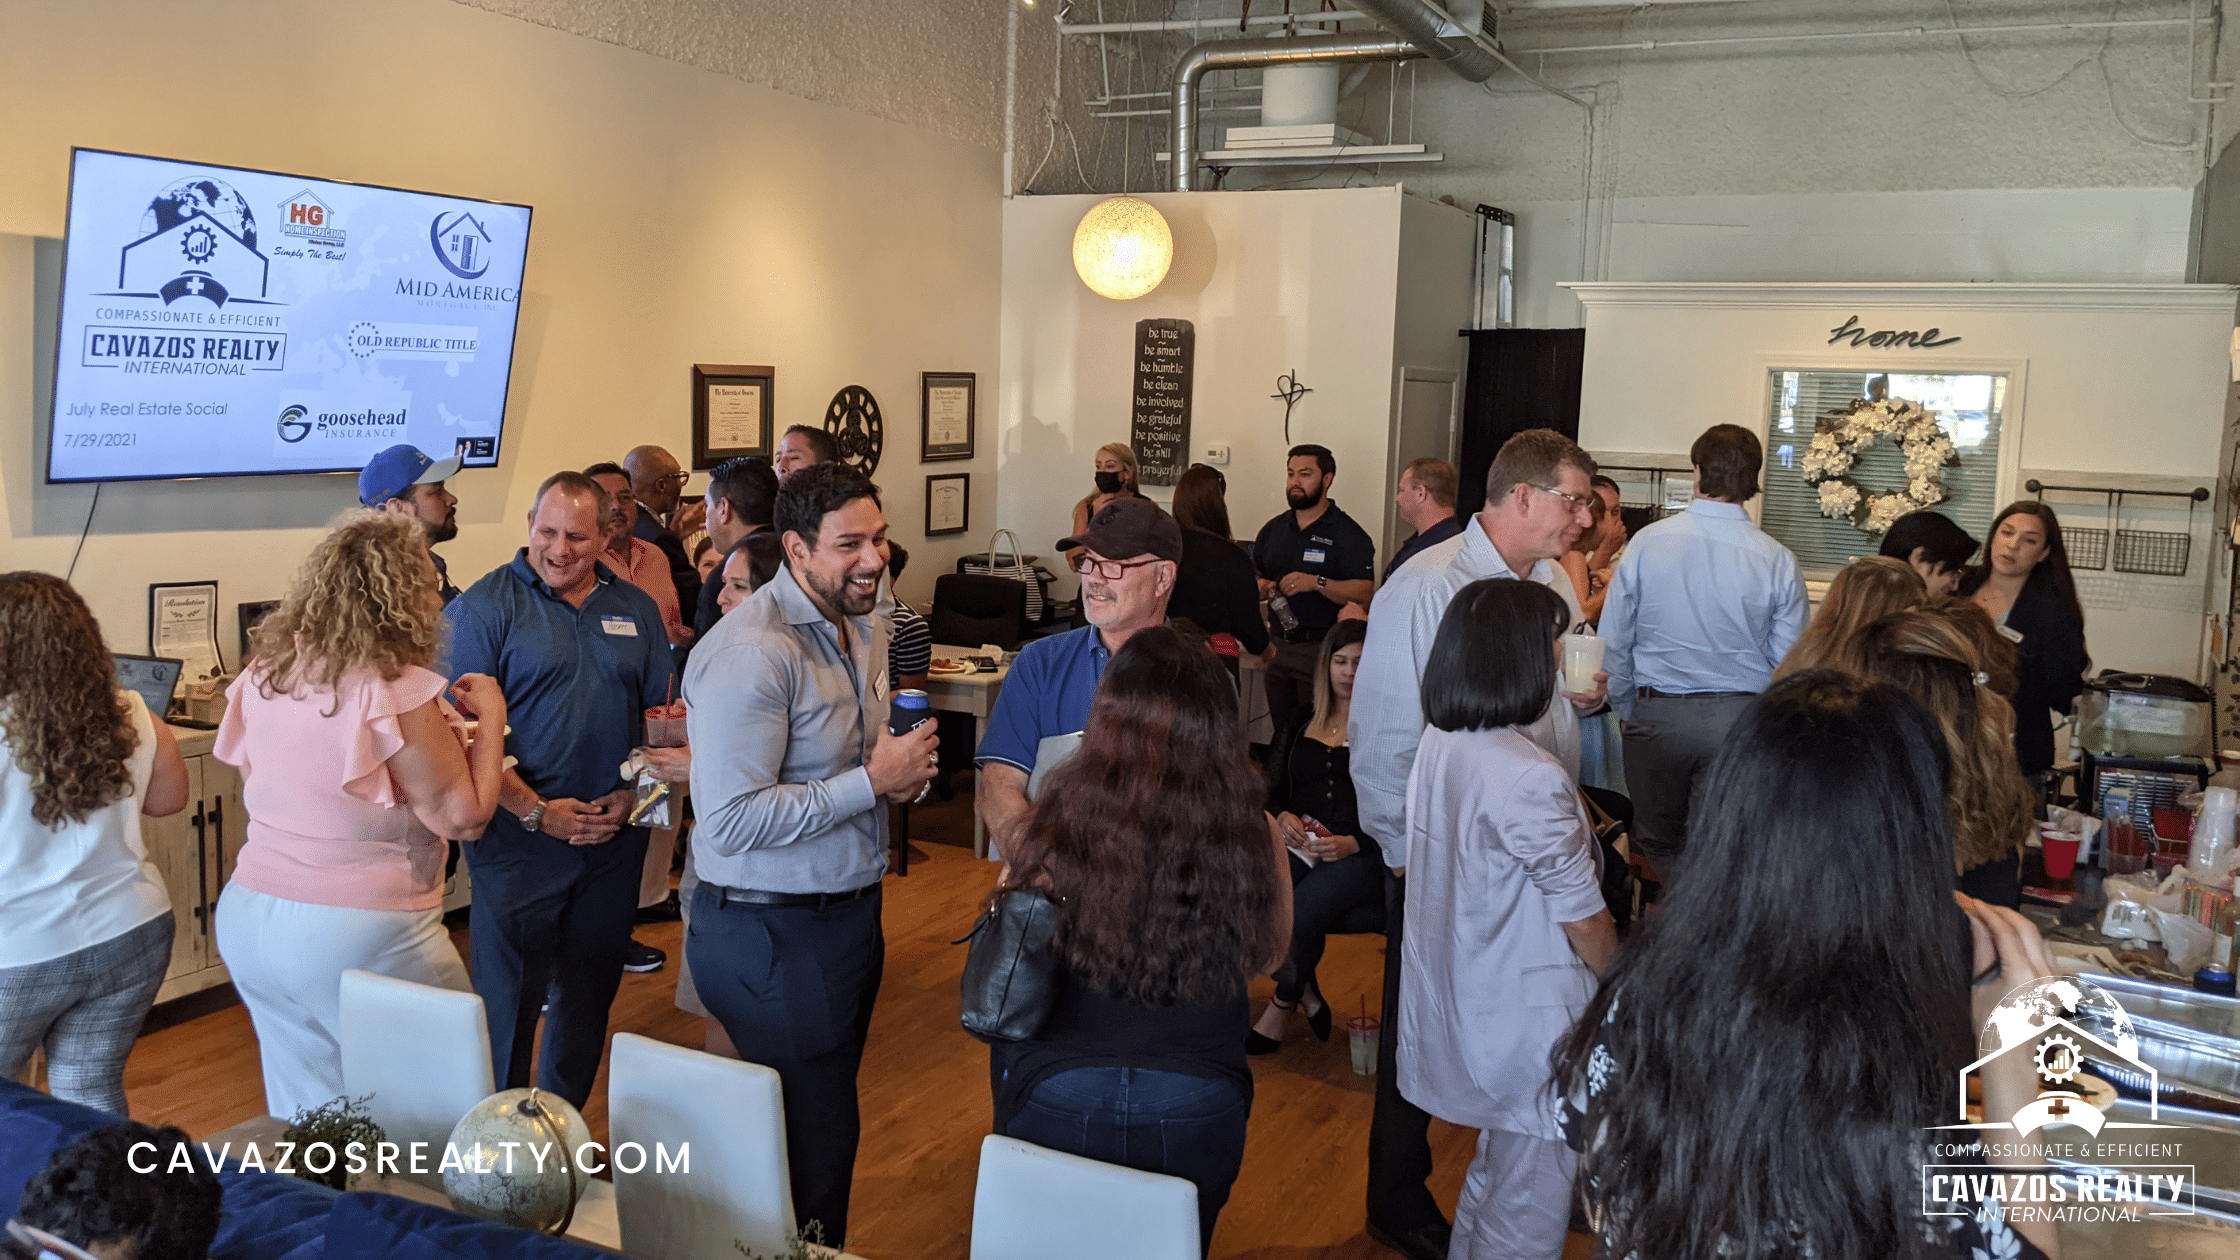 houston real estate networking event 1-27-2022